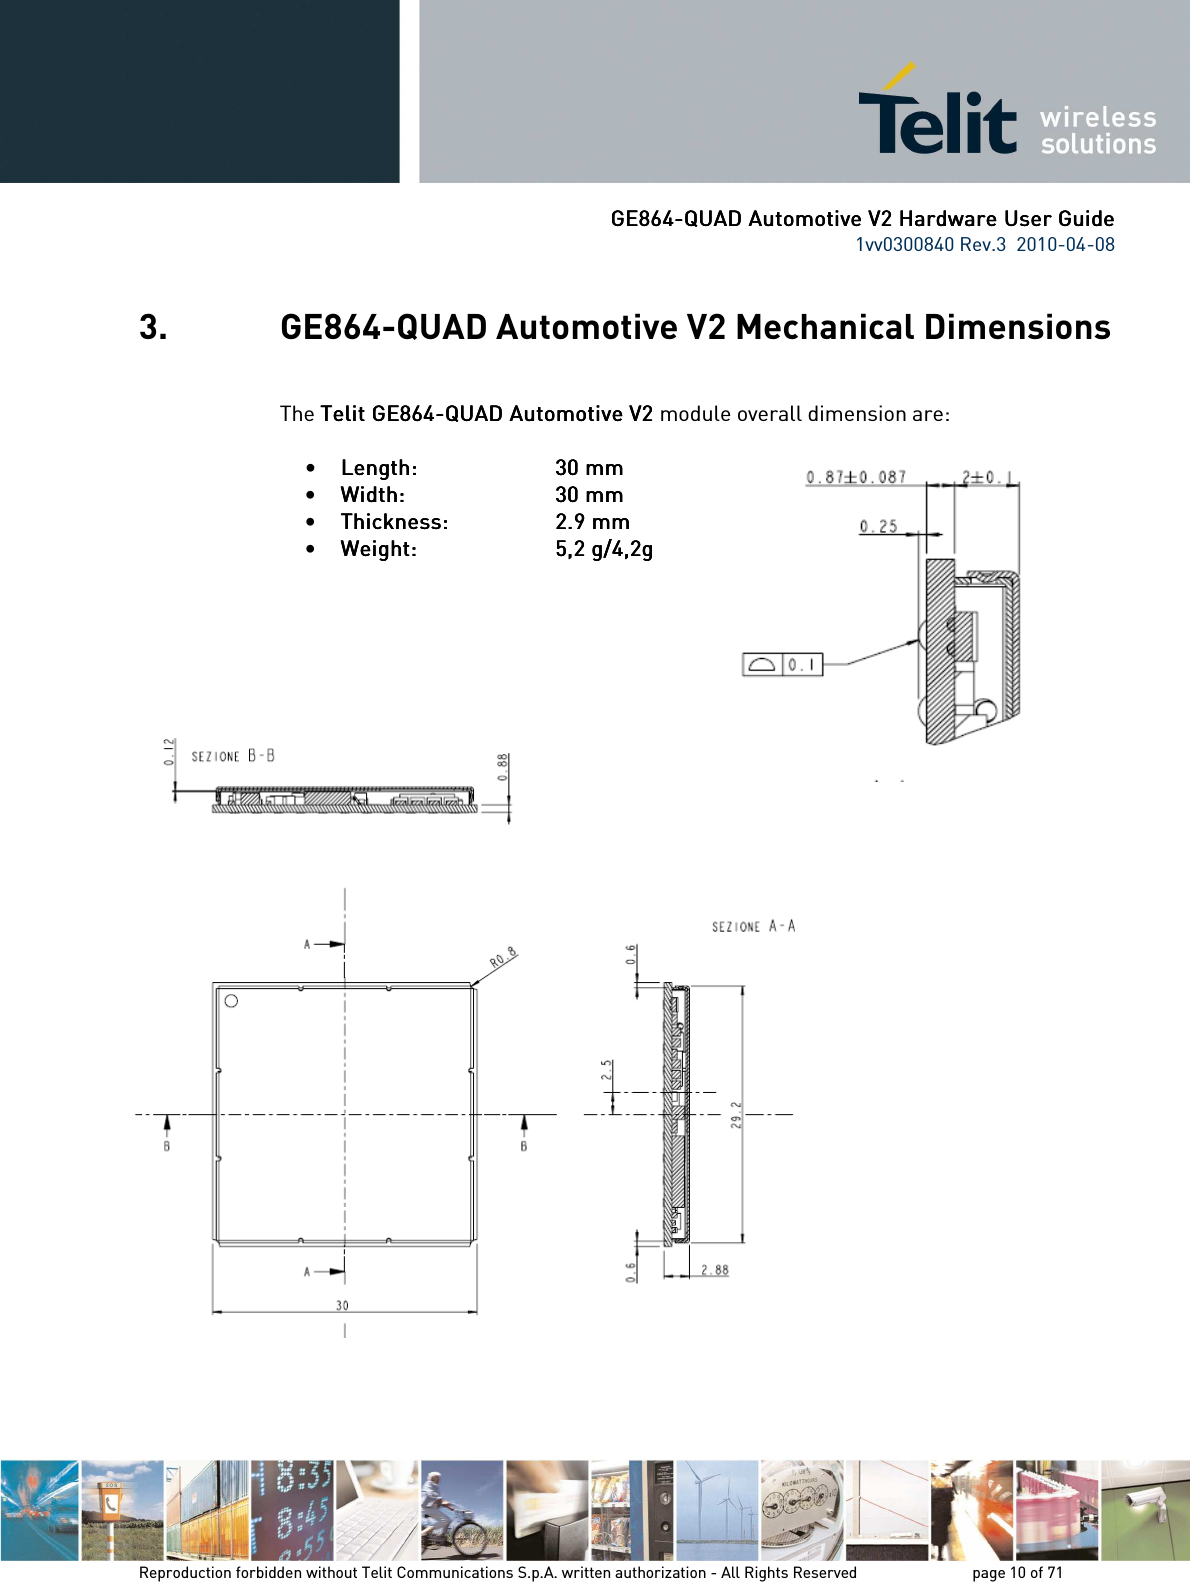      GE864GE864GE864GE864----QUAD Automotive V2 Hardware User GuideQUAD Automotive V2 Hardware User GuideQUAD Automotive V2 Hardware User GuideQUAD Automotive V2 Hardware User Guide    1vv0300840 Rev.3  2010-04-08       Reproduction forbidden without Telit Communications S.p.A. written authorization - All Rights Reserved    page 10 of 71  3. GE864-QUAD Automotive V2 Mechanical Dimensions  The Telit Telit Telit Telit GE864GE864GE864GE864----QUAD Automotive V2QUAD Automotive V2QUAD Automotive V2QUAD Automotive V2    module overall dimension are:  • Length: Length: Length: Length:           30 mm30 mm30 mm30 mm    • Width: Width: Width: Width:           30 mm 30 mm 30 mm 30 mm     • Thickness: Thickness: Thickness: Thickness:           2.92.92.92.9 mm mm mm mm    • Weight:Weight:Weight:Weight:          5,2 g/4,2g5,2 g/4,2g5,2 g/4,2g5,2 g/4,2g                        